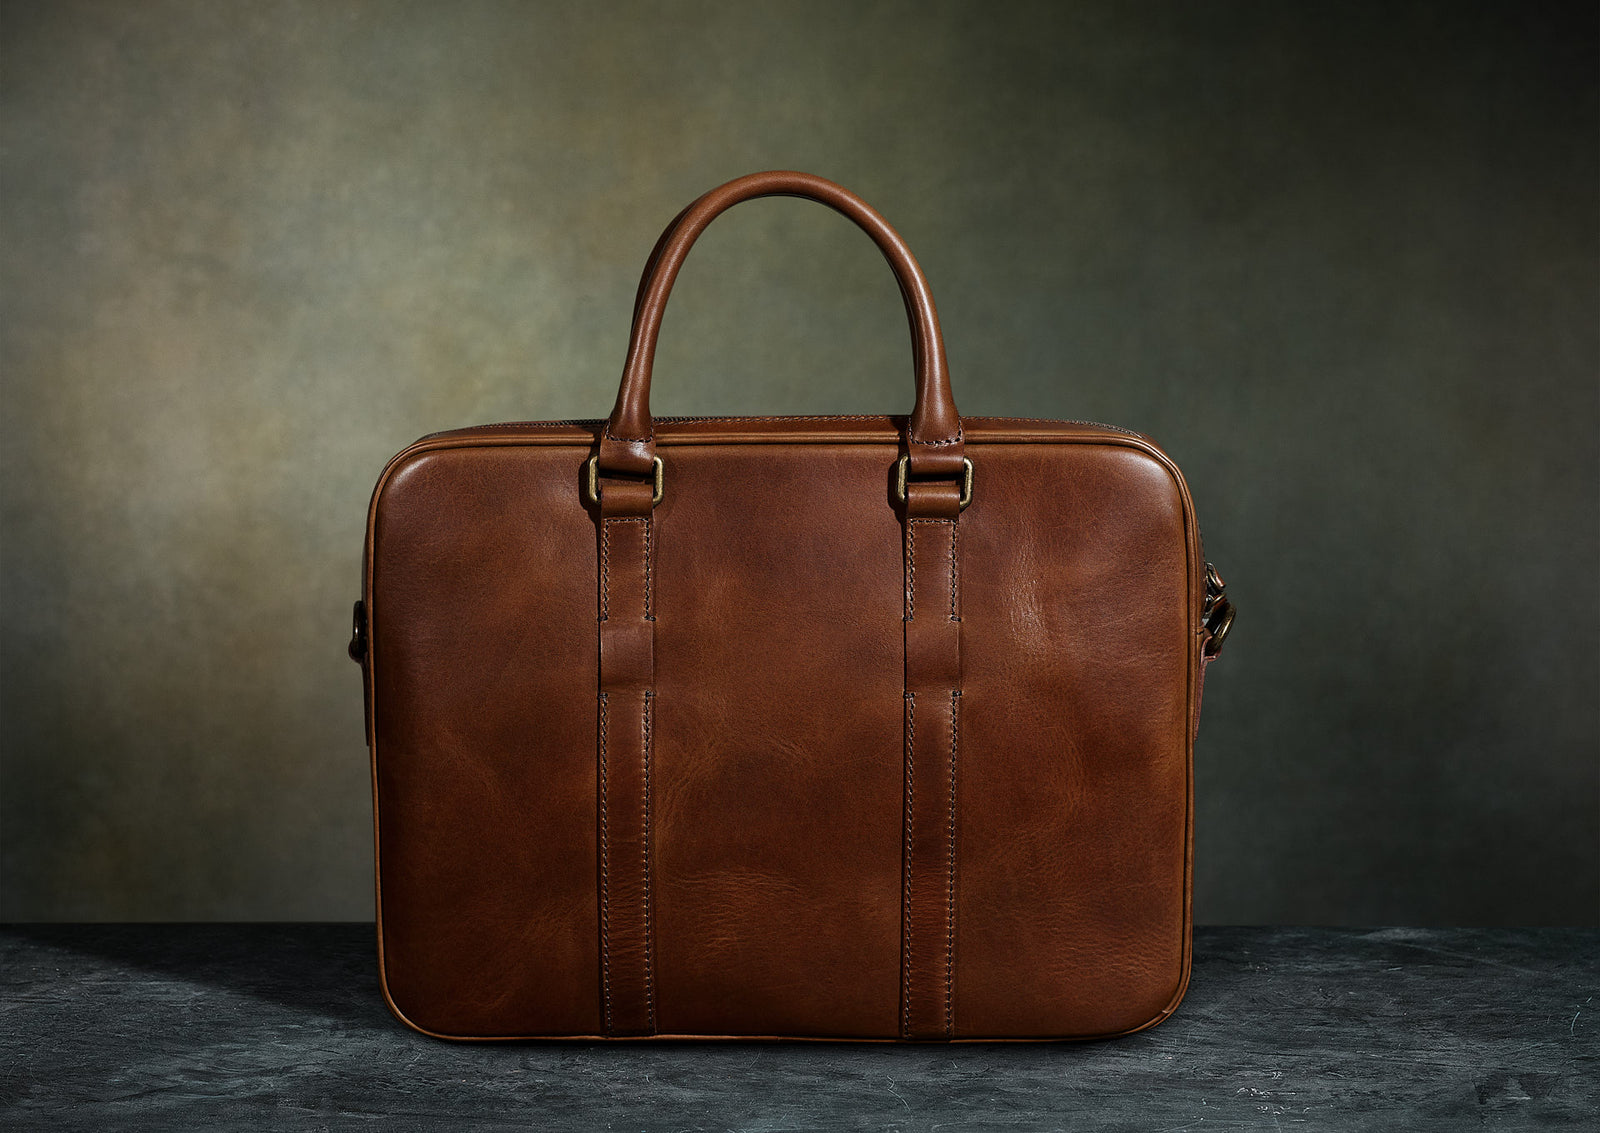 Hartmann Smooth Leather Briefcase - Brown Briefcases, Bags - WHTMN20381